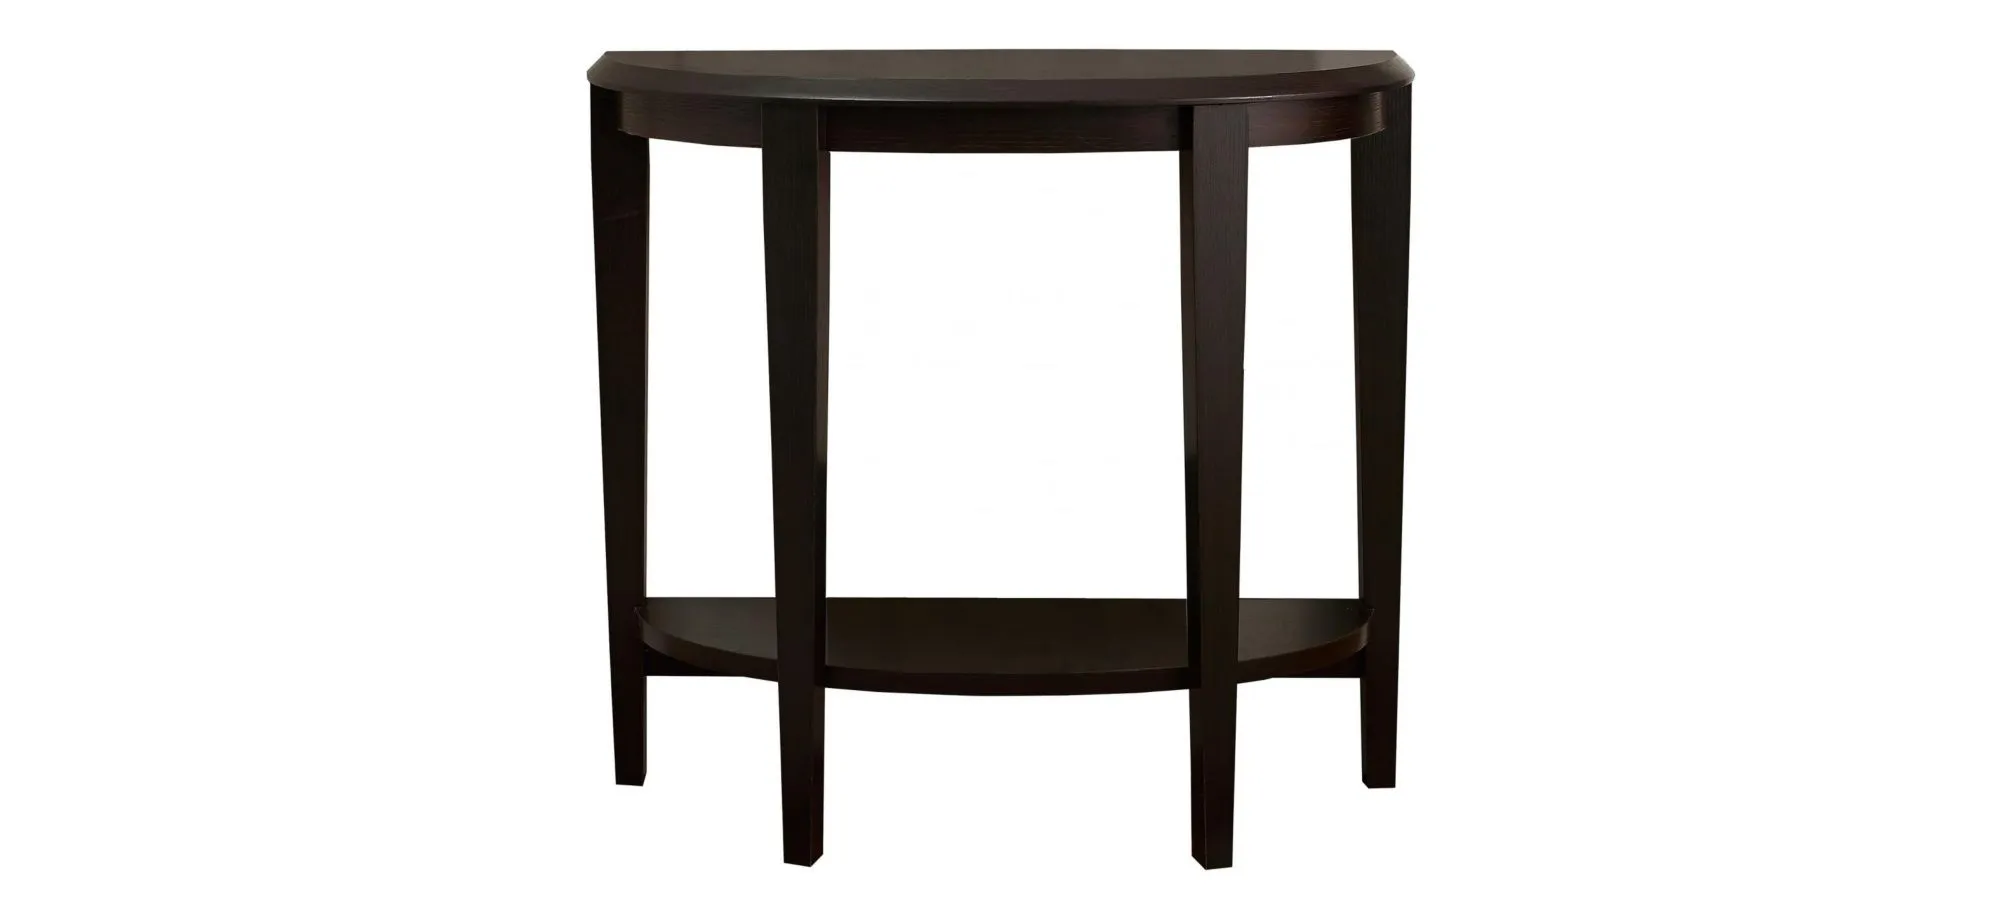 Penfield Accent Table in Cappuccino by Monarch Specialties